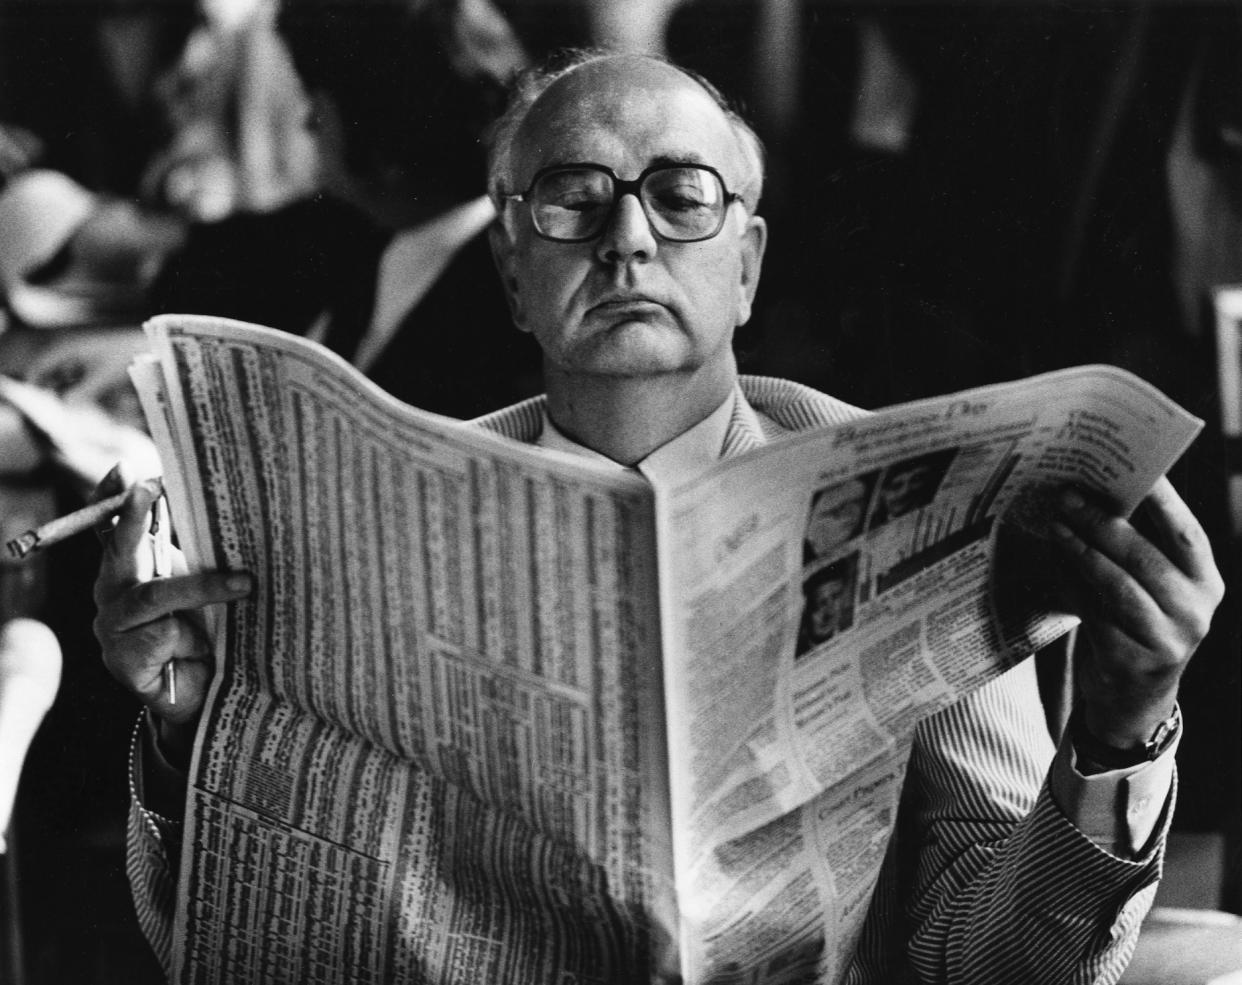 WASHINGTON, DC - AUGUST 5:
Federal Reserve Chairman Paul Volcker reading the financial page as he waits for a hearing in Washington, DC on August 5, 1980. (Photo by James K. W. Atherton/The Washington Post via Getty Images)